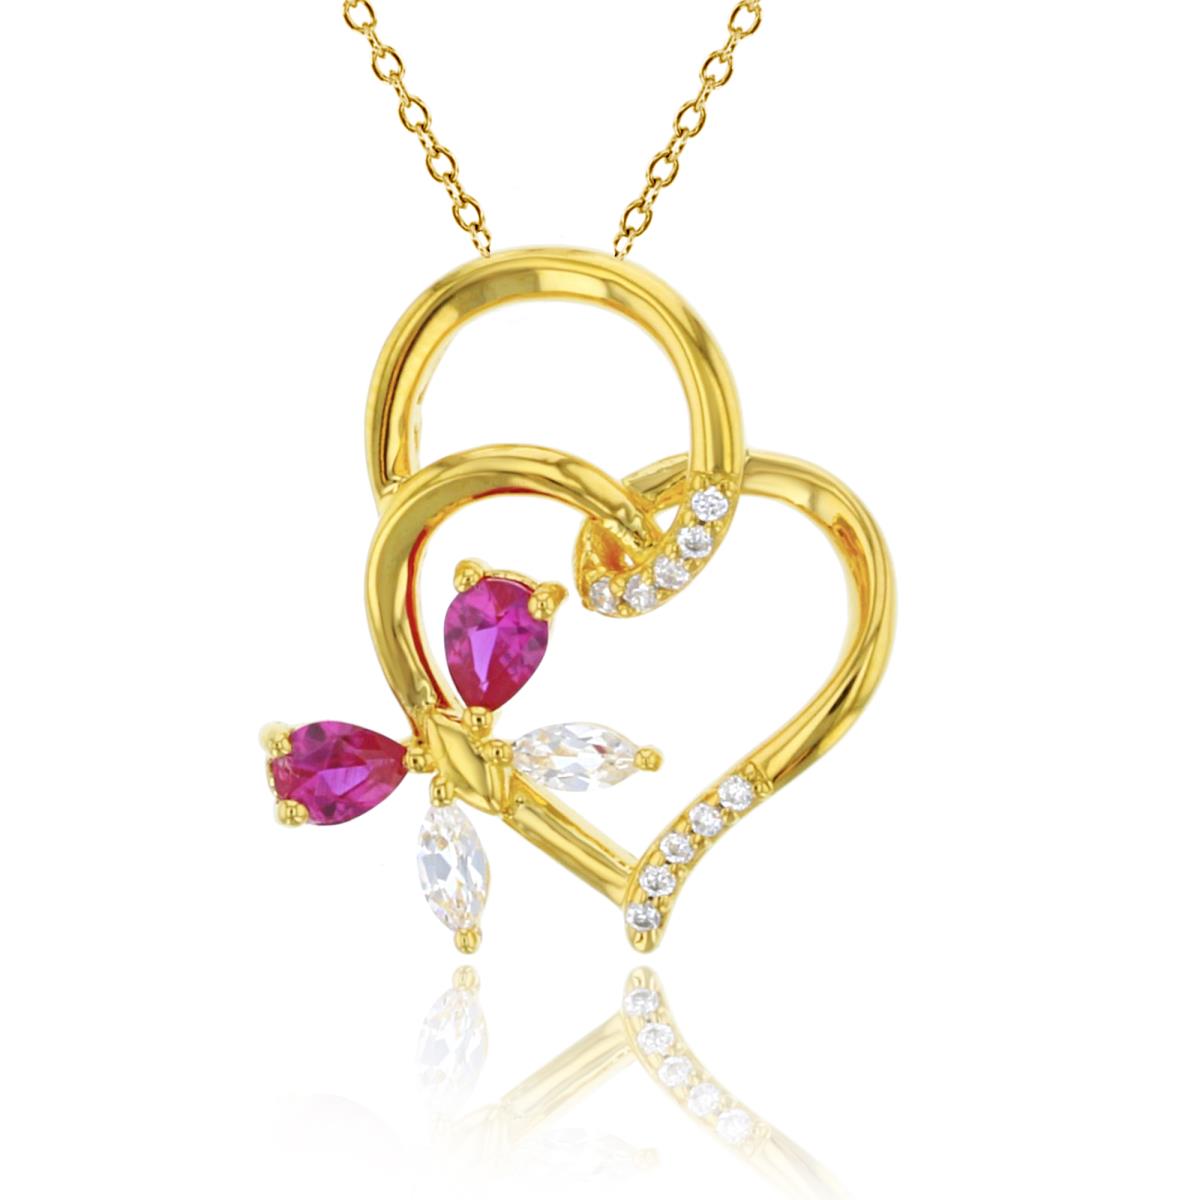 Sterling Silver+1Micron 14K Yellow Gold Rnd CZ & PS Cr Ruby/Mq White Sapphire Dbl Hearts/Flower 18"Necklace